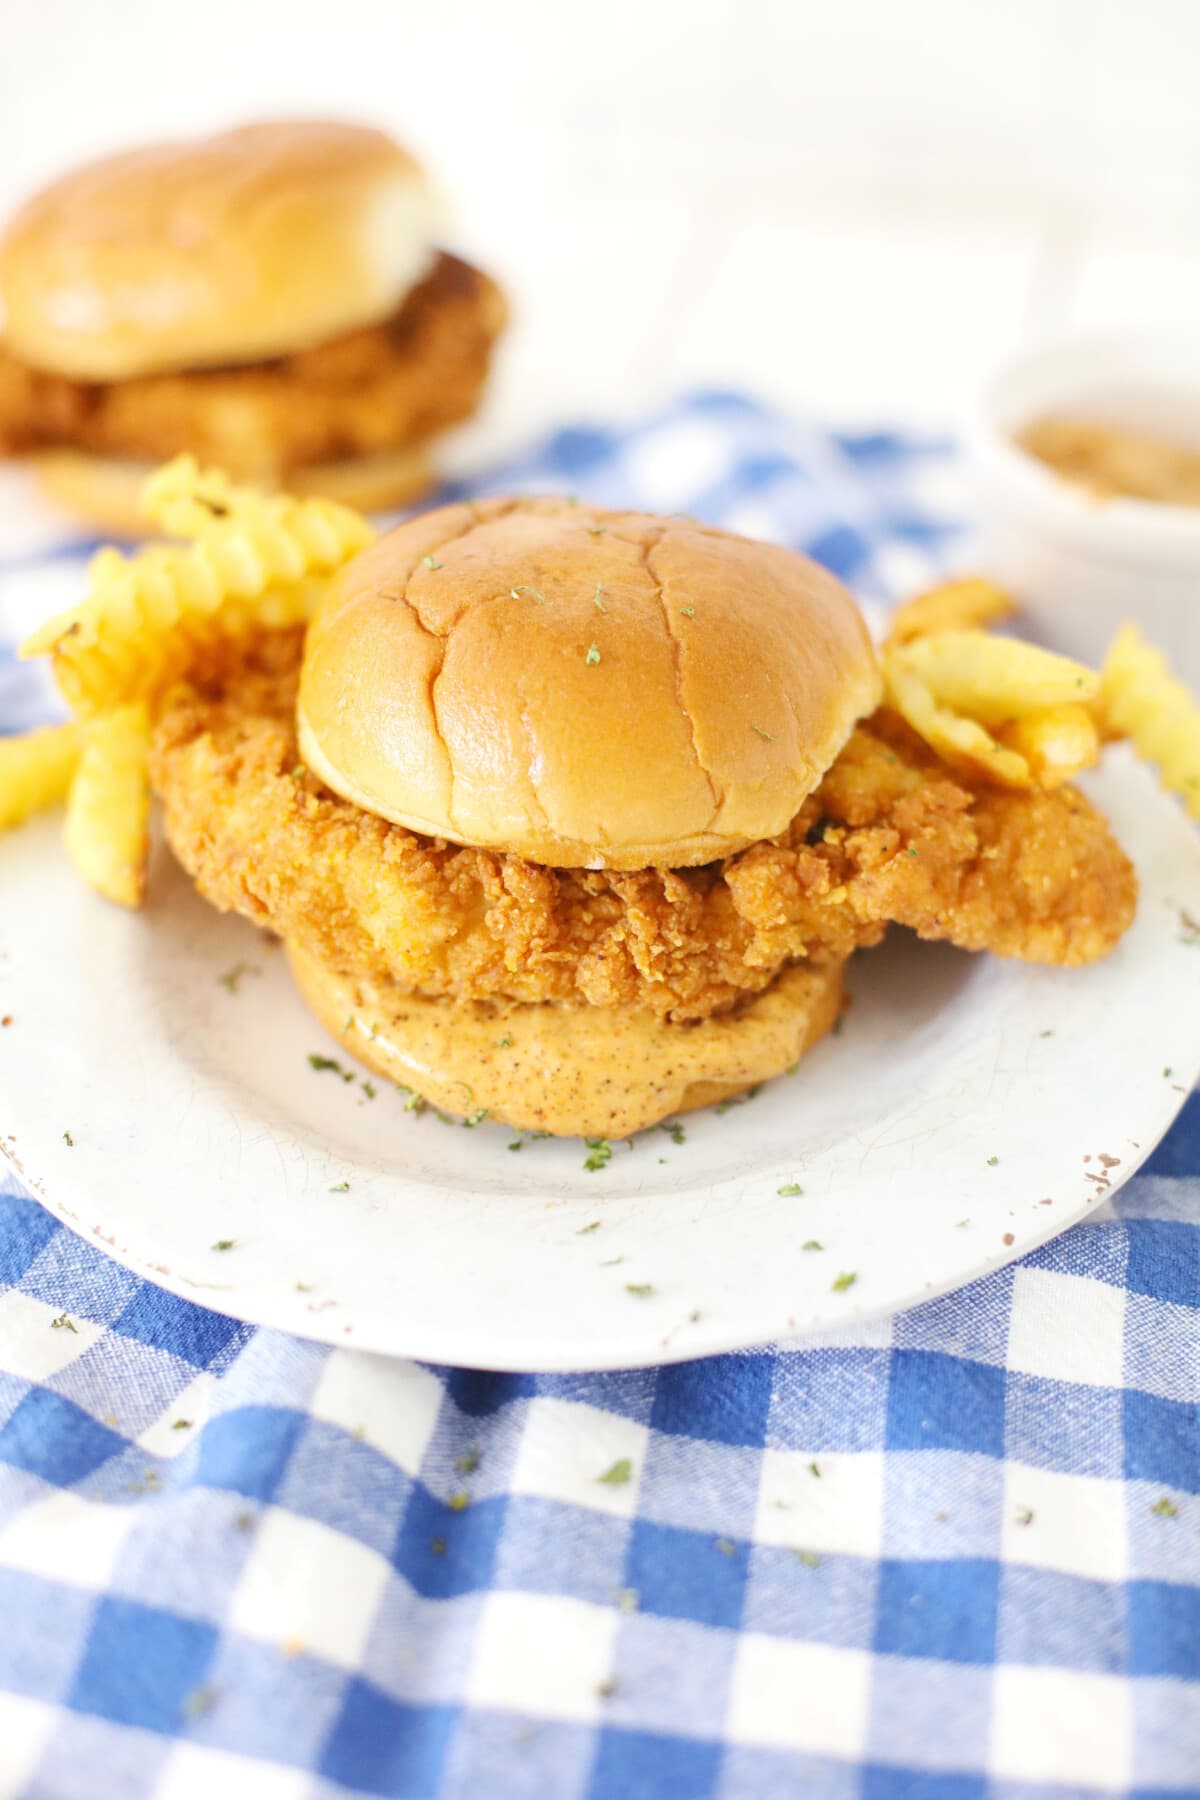 Top view of fried chicken sandwich on a plate